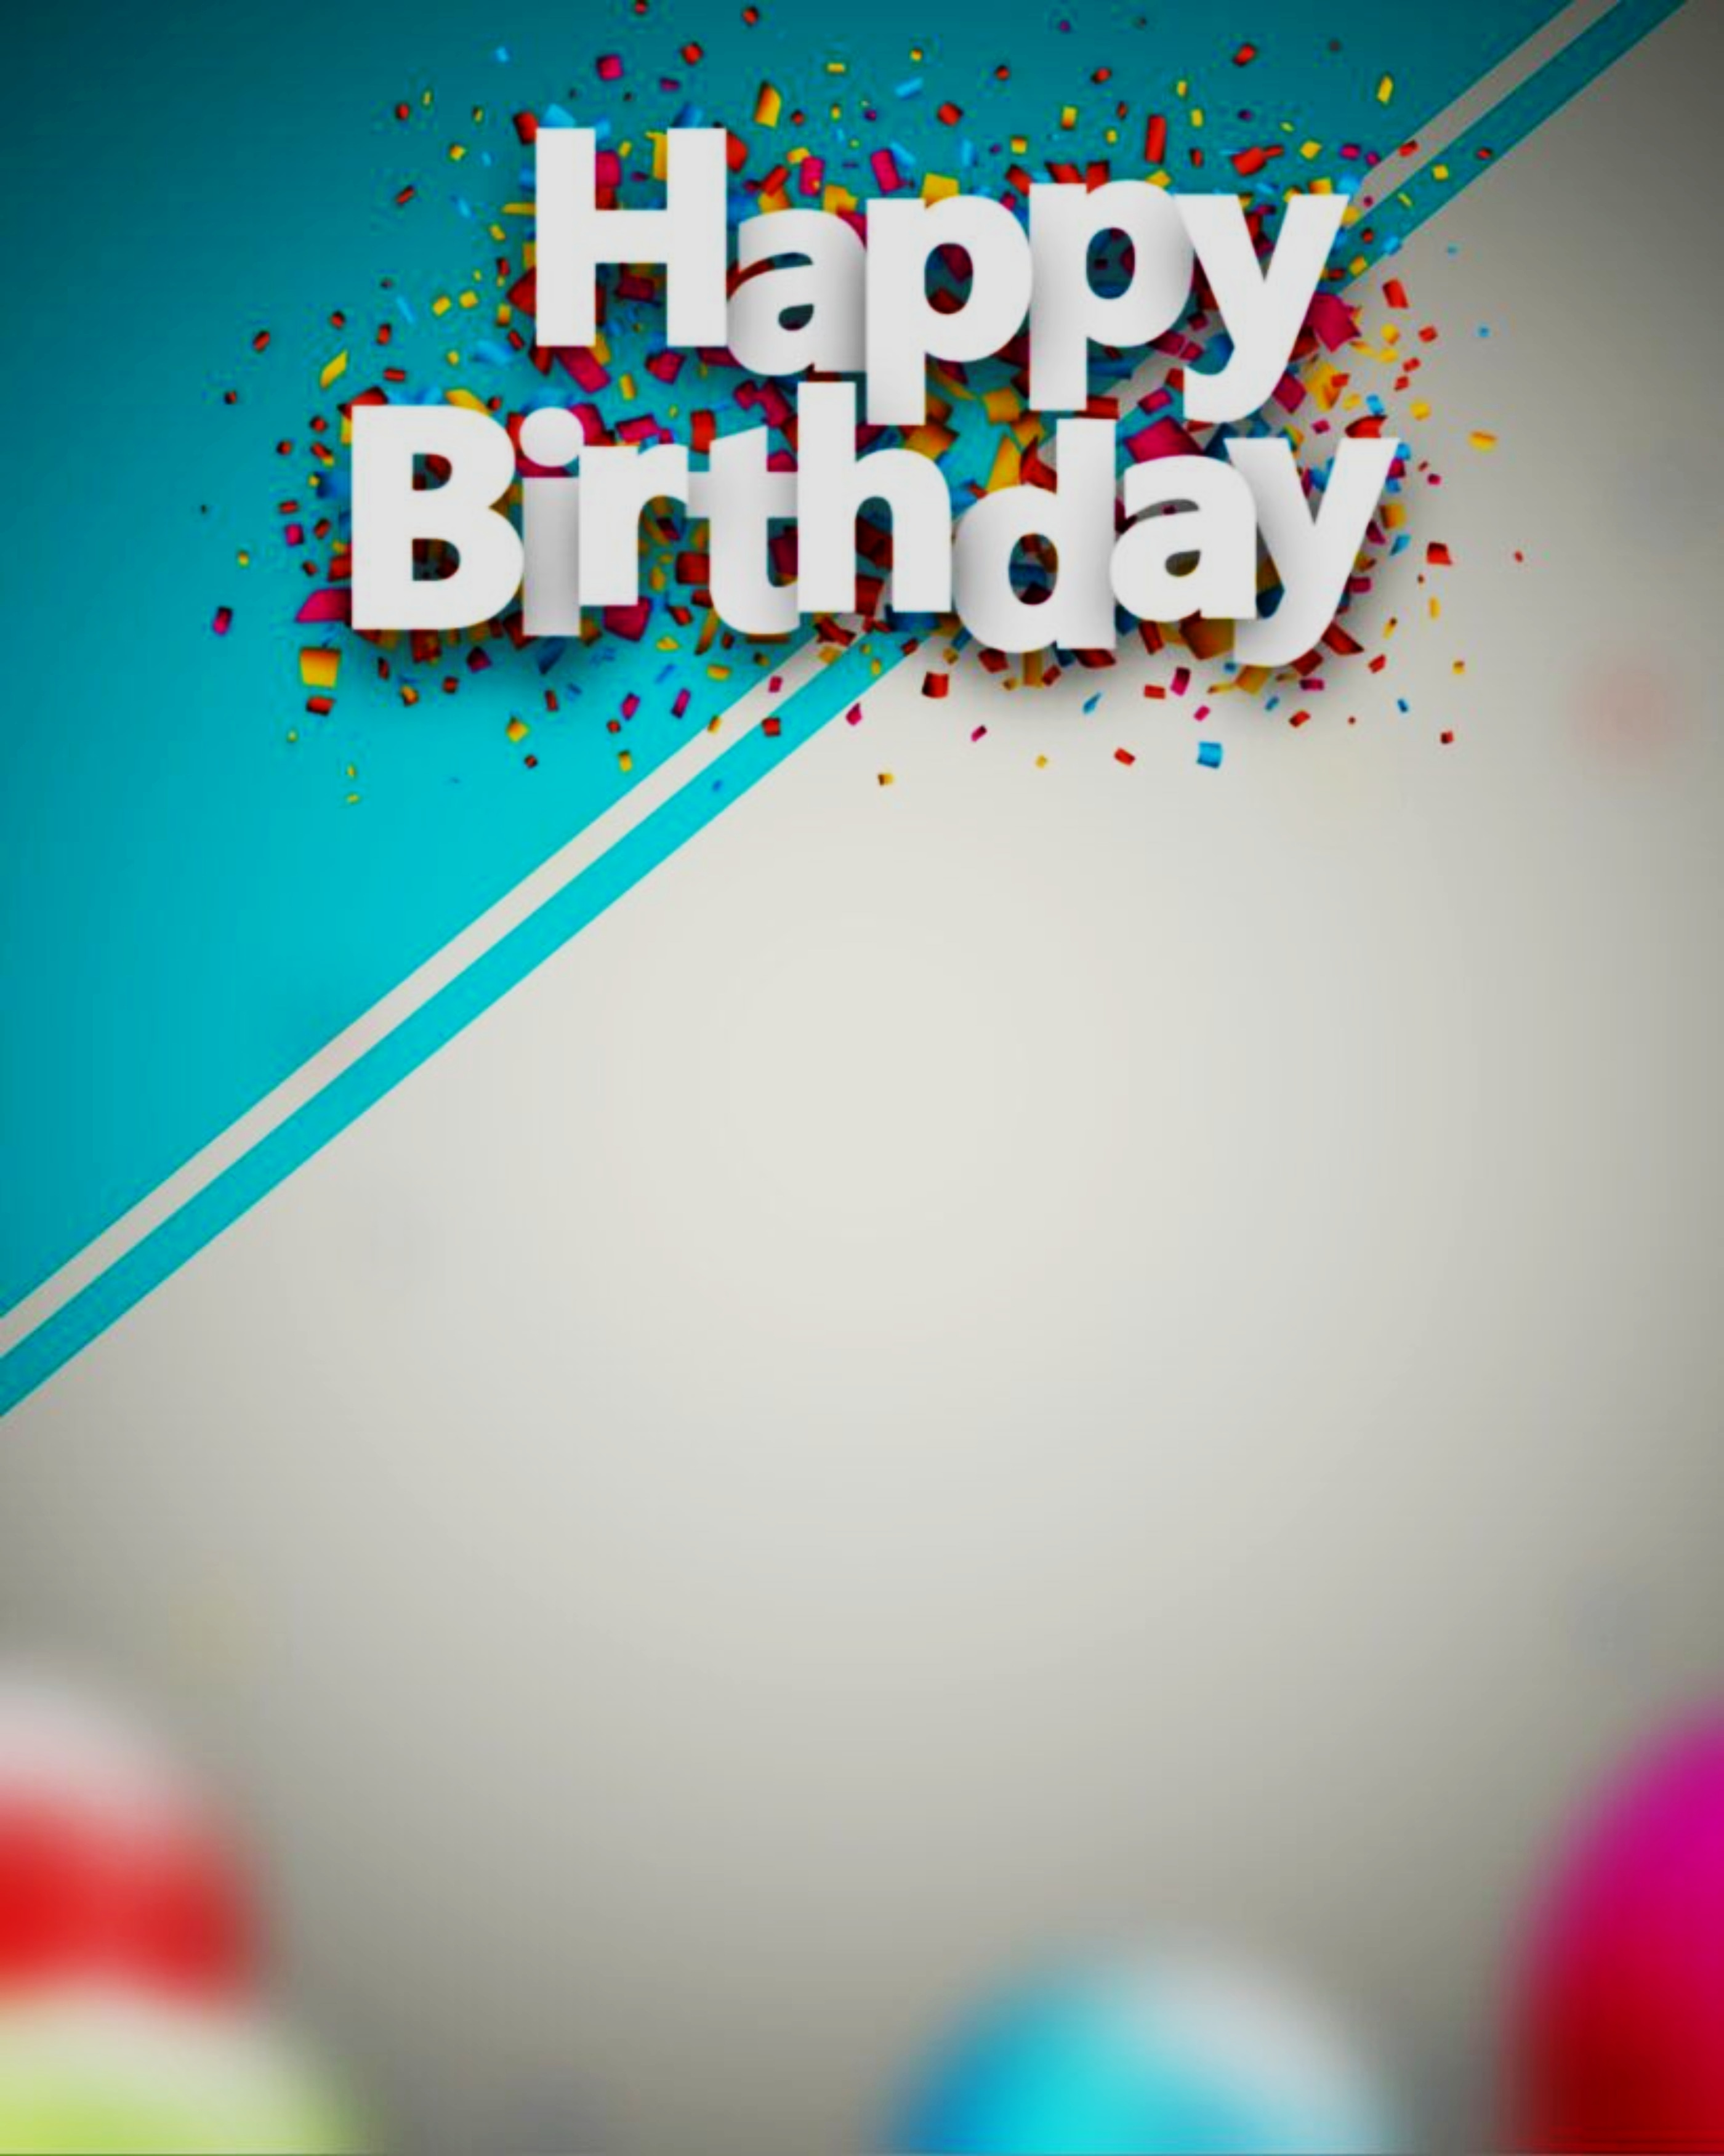 You are currently viewing Happy birthday background download for editing free